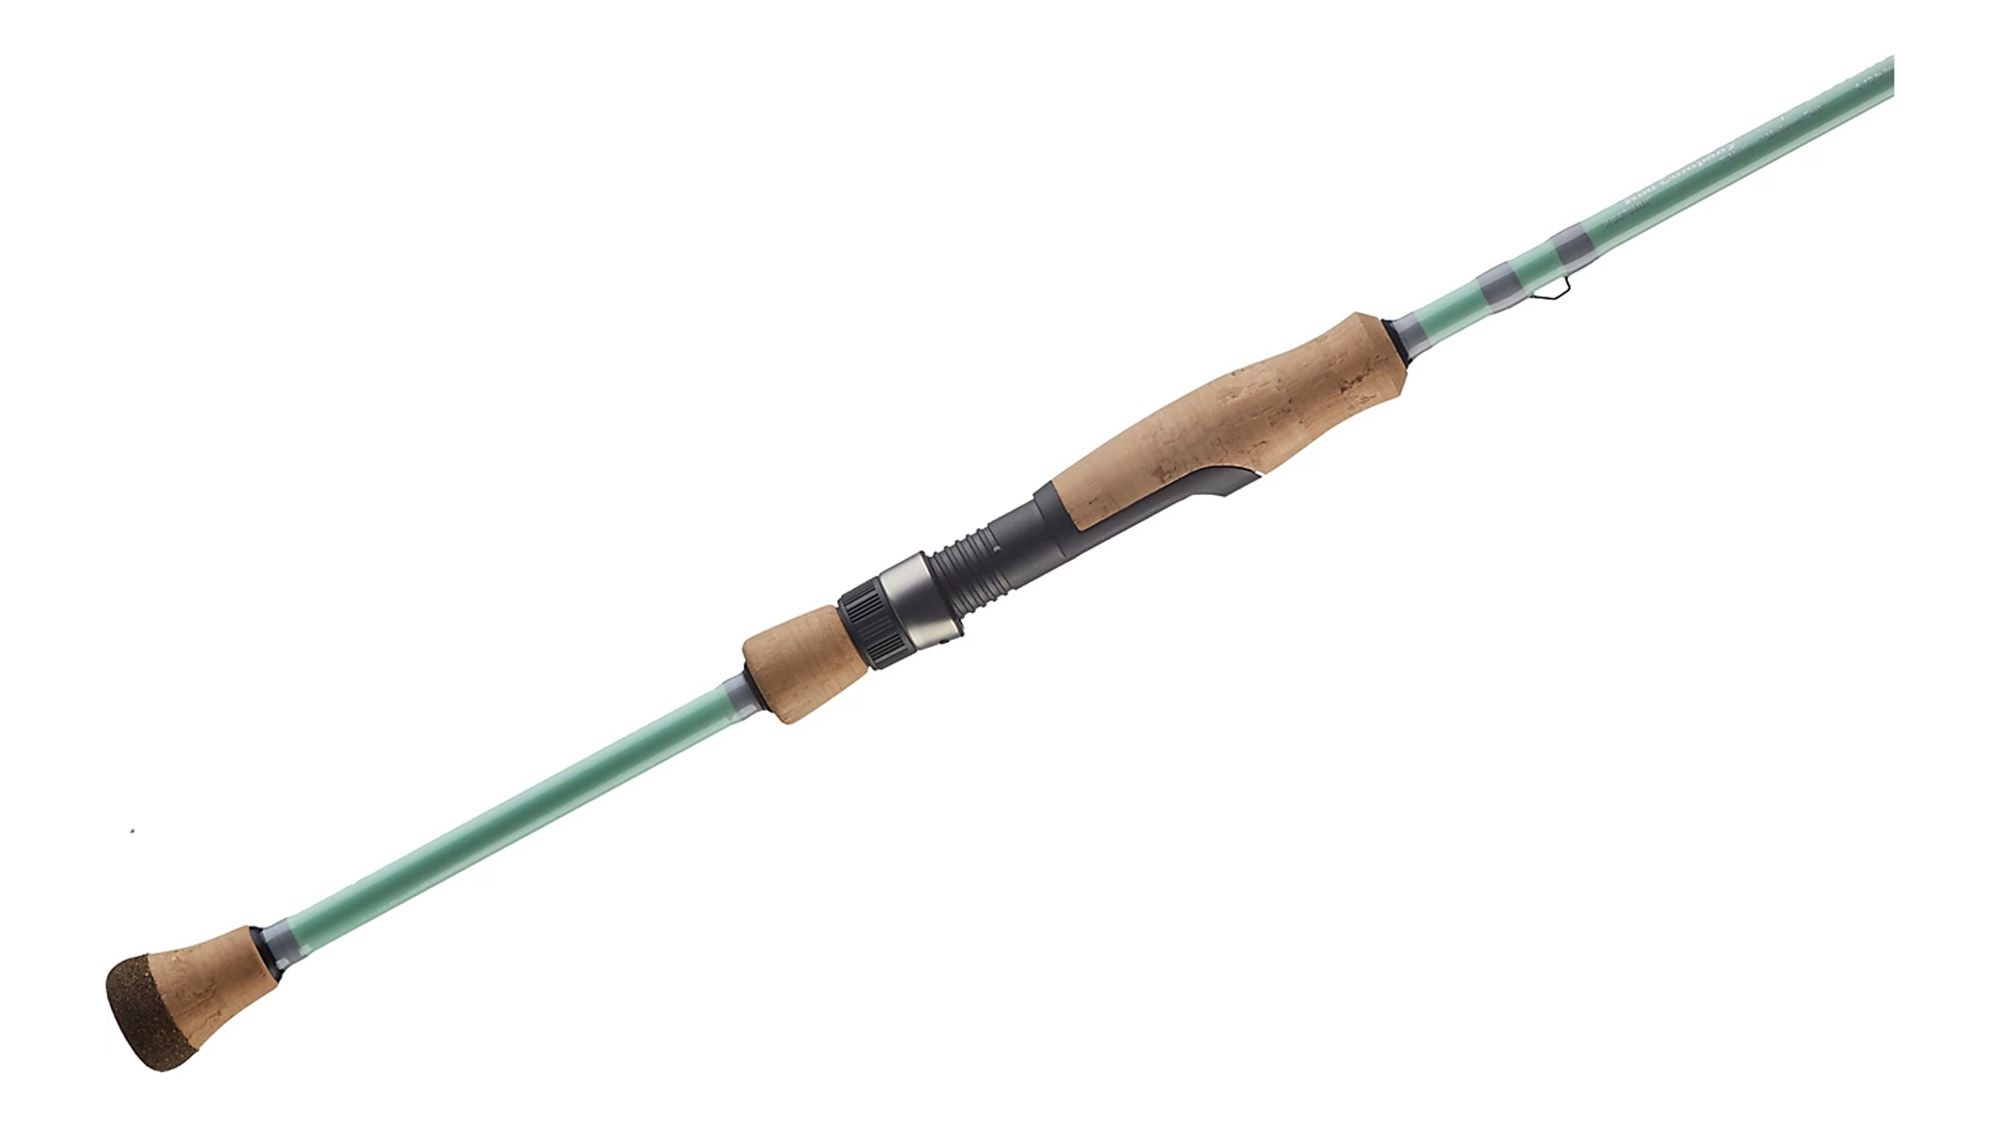 St. Croix Rods - One-Two Punch! When fishing the slop